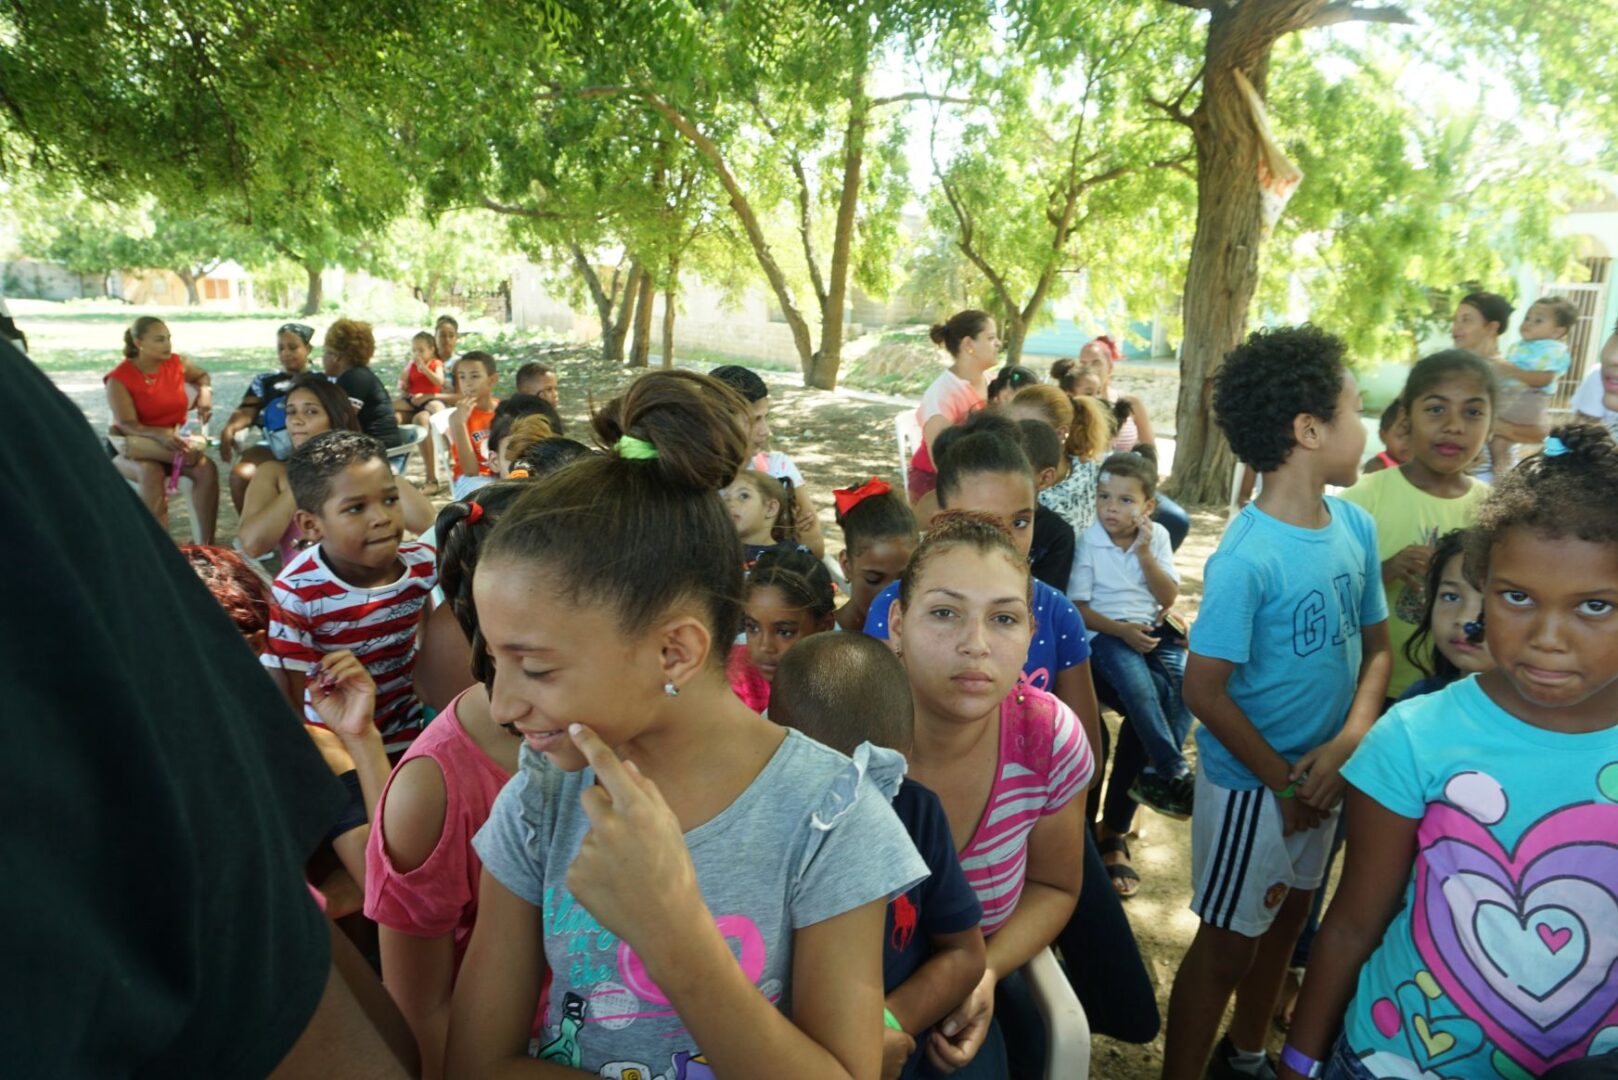 A crowd of children and their parents sitting and standing in the shade of the trees